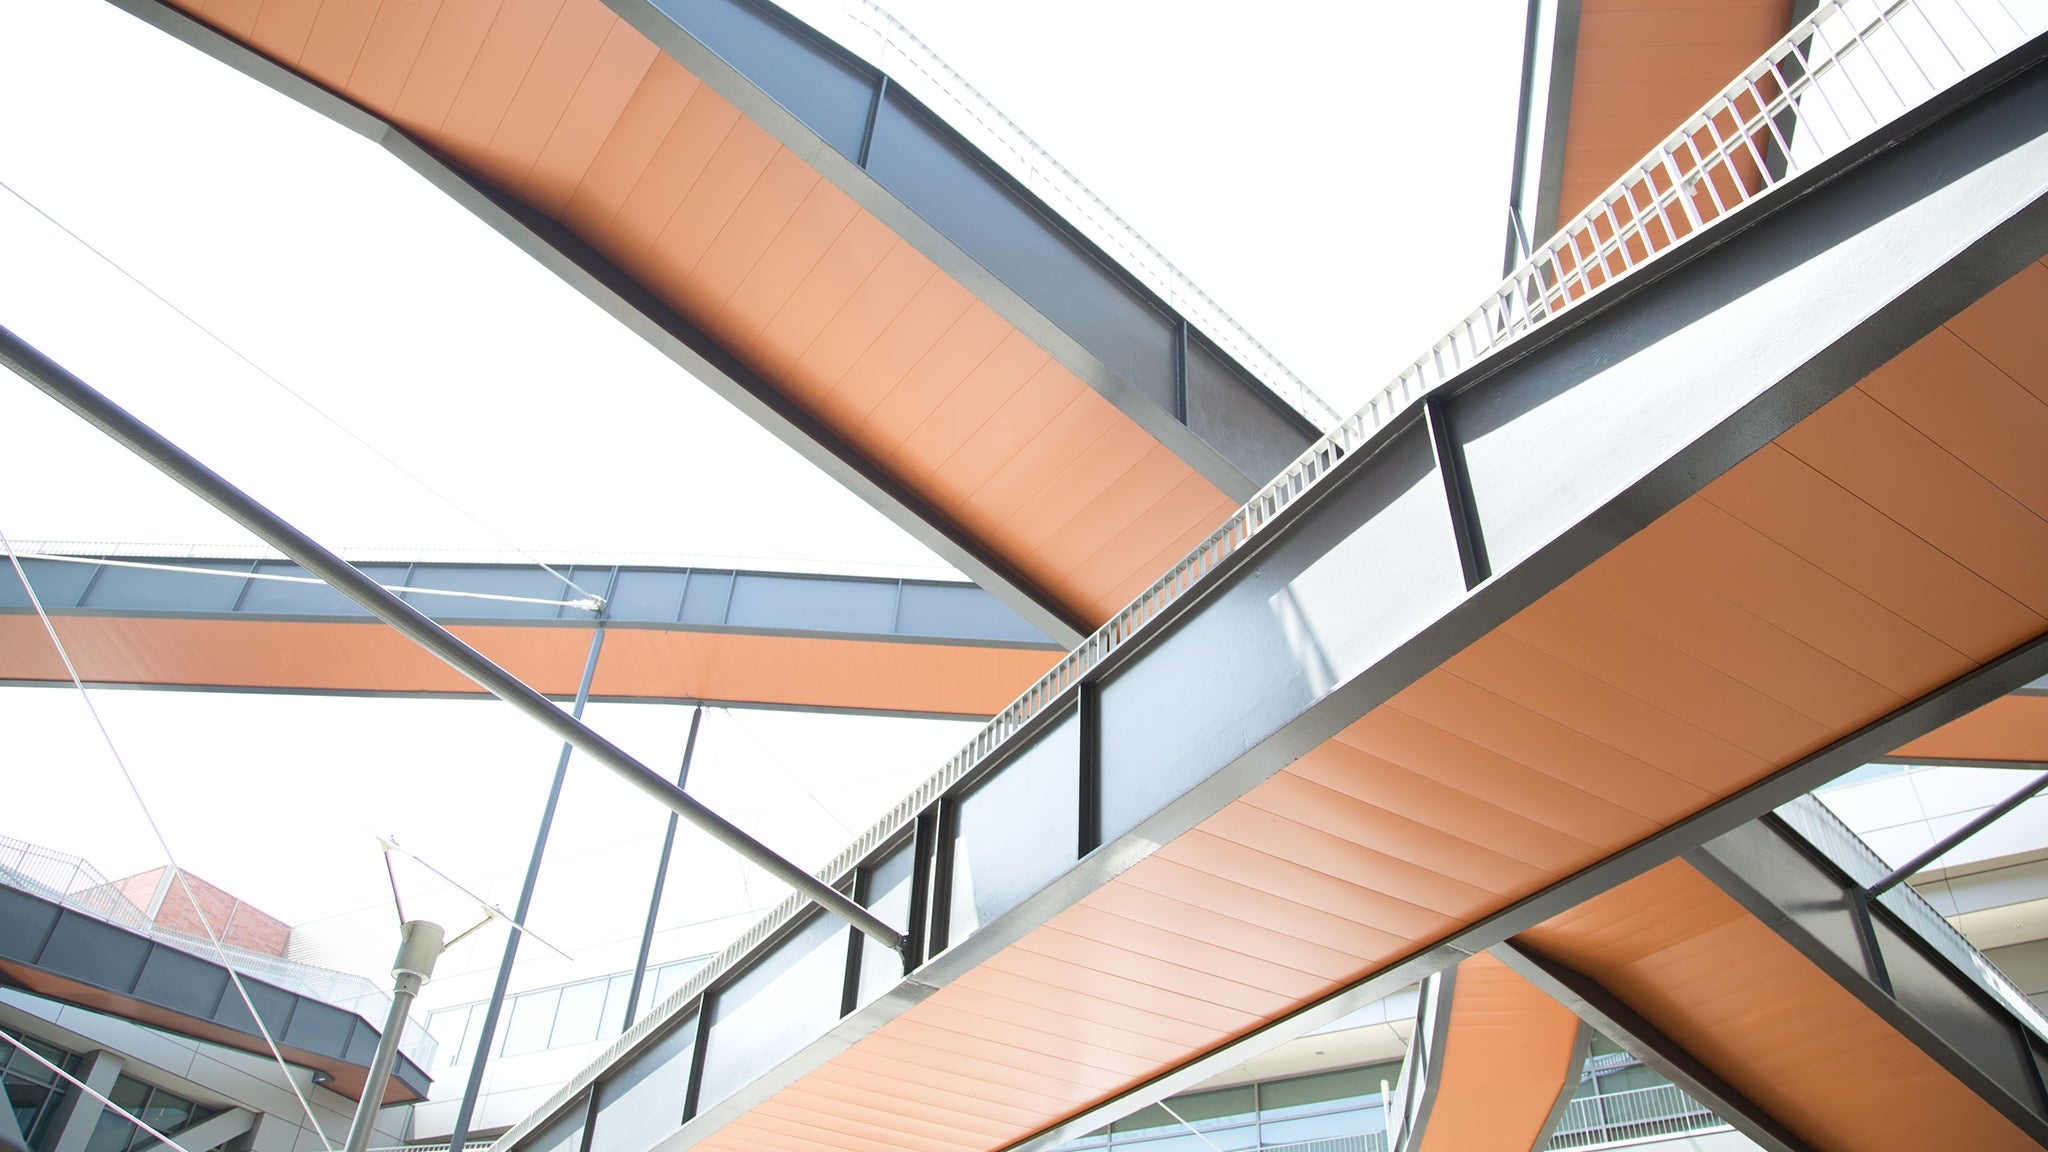 The crisscrossing walkways at the California NanoSystems Institute provide architectural appeal.